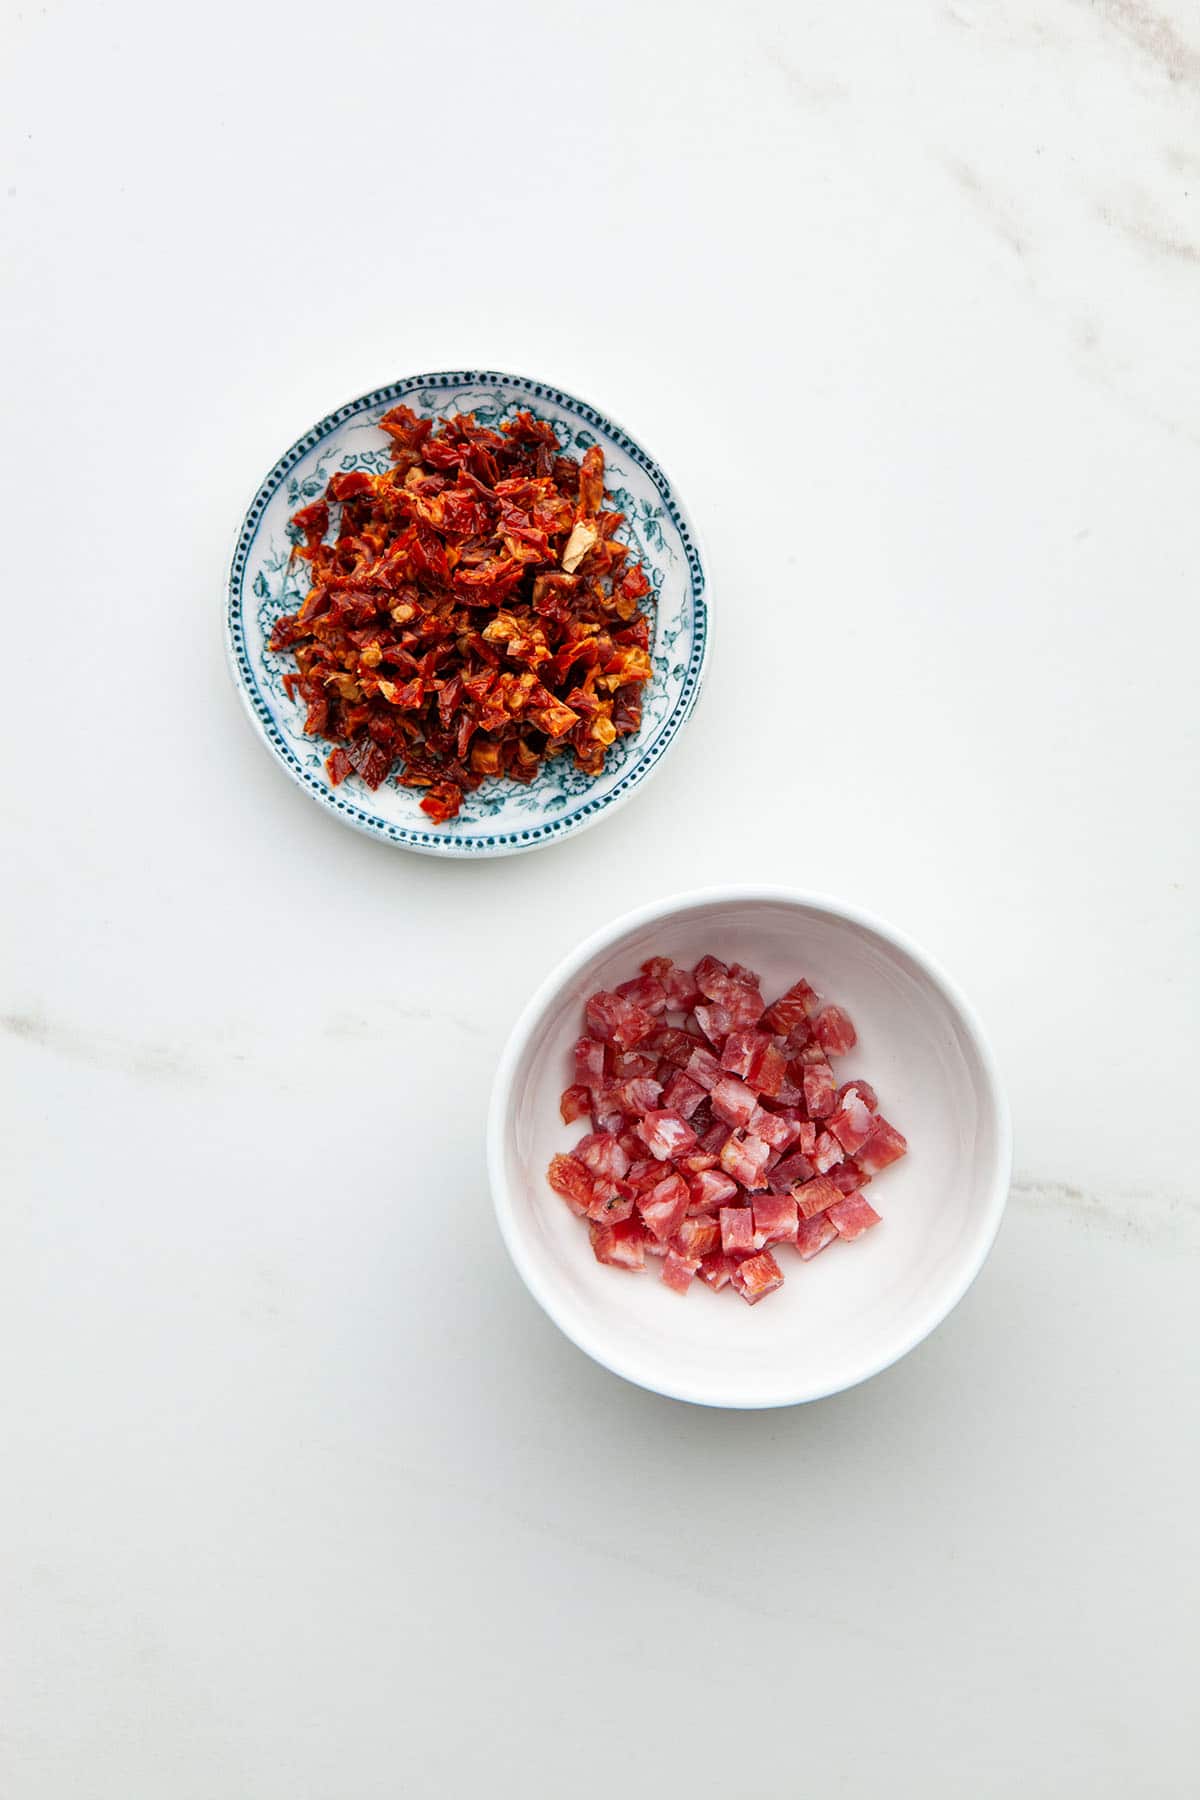 A small dish of finely diced sun dried tomatoes above a small bowl of finely diced Genoa salami.